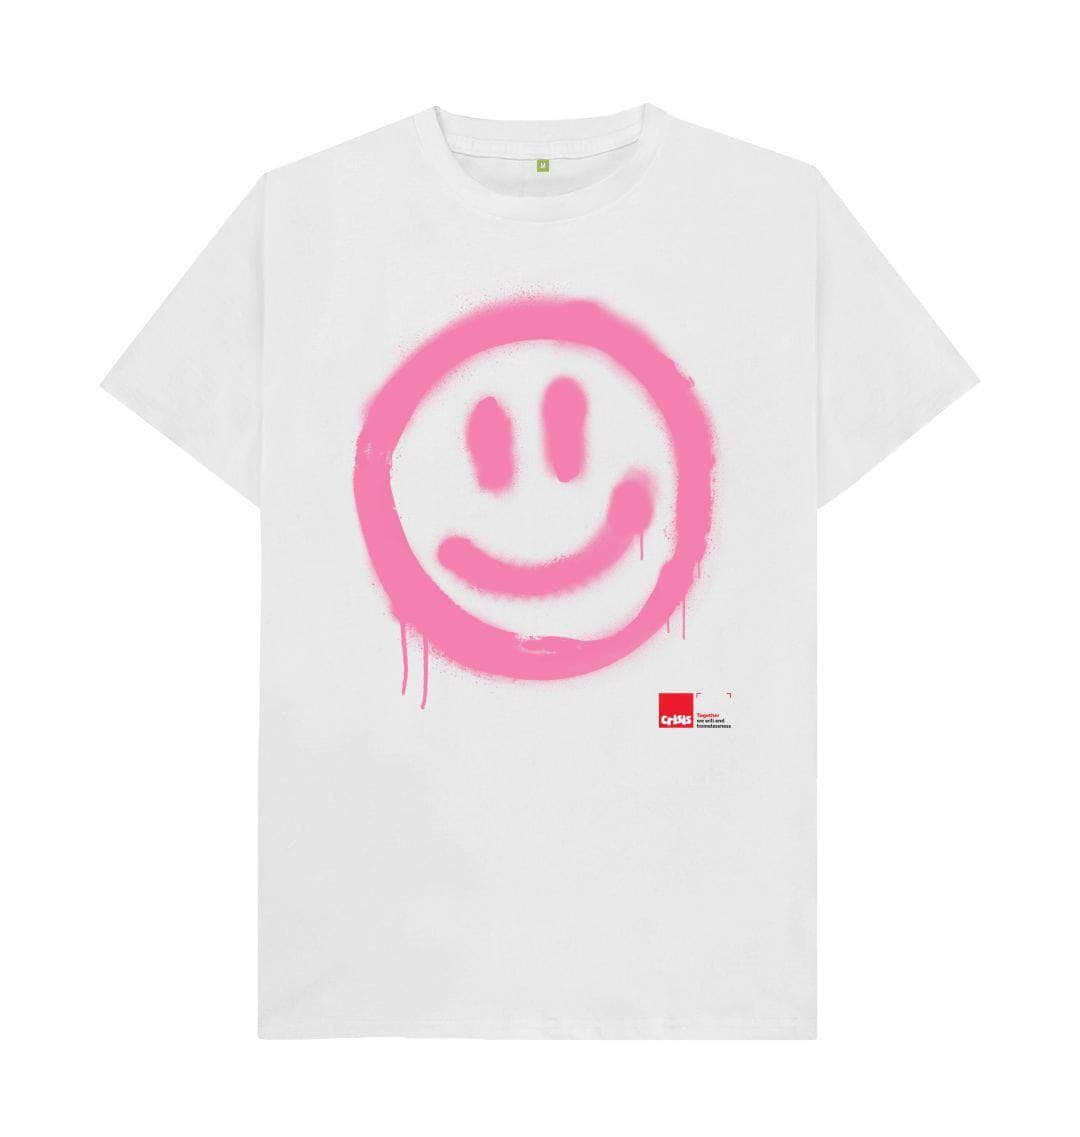 White Smiley Face T-shirt